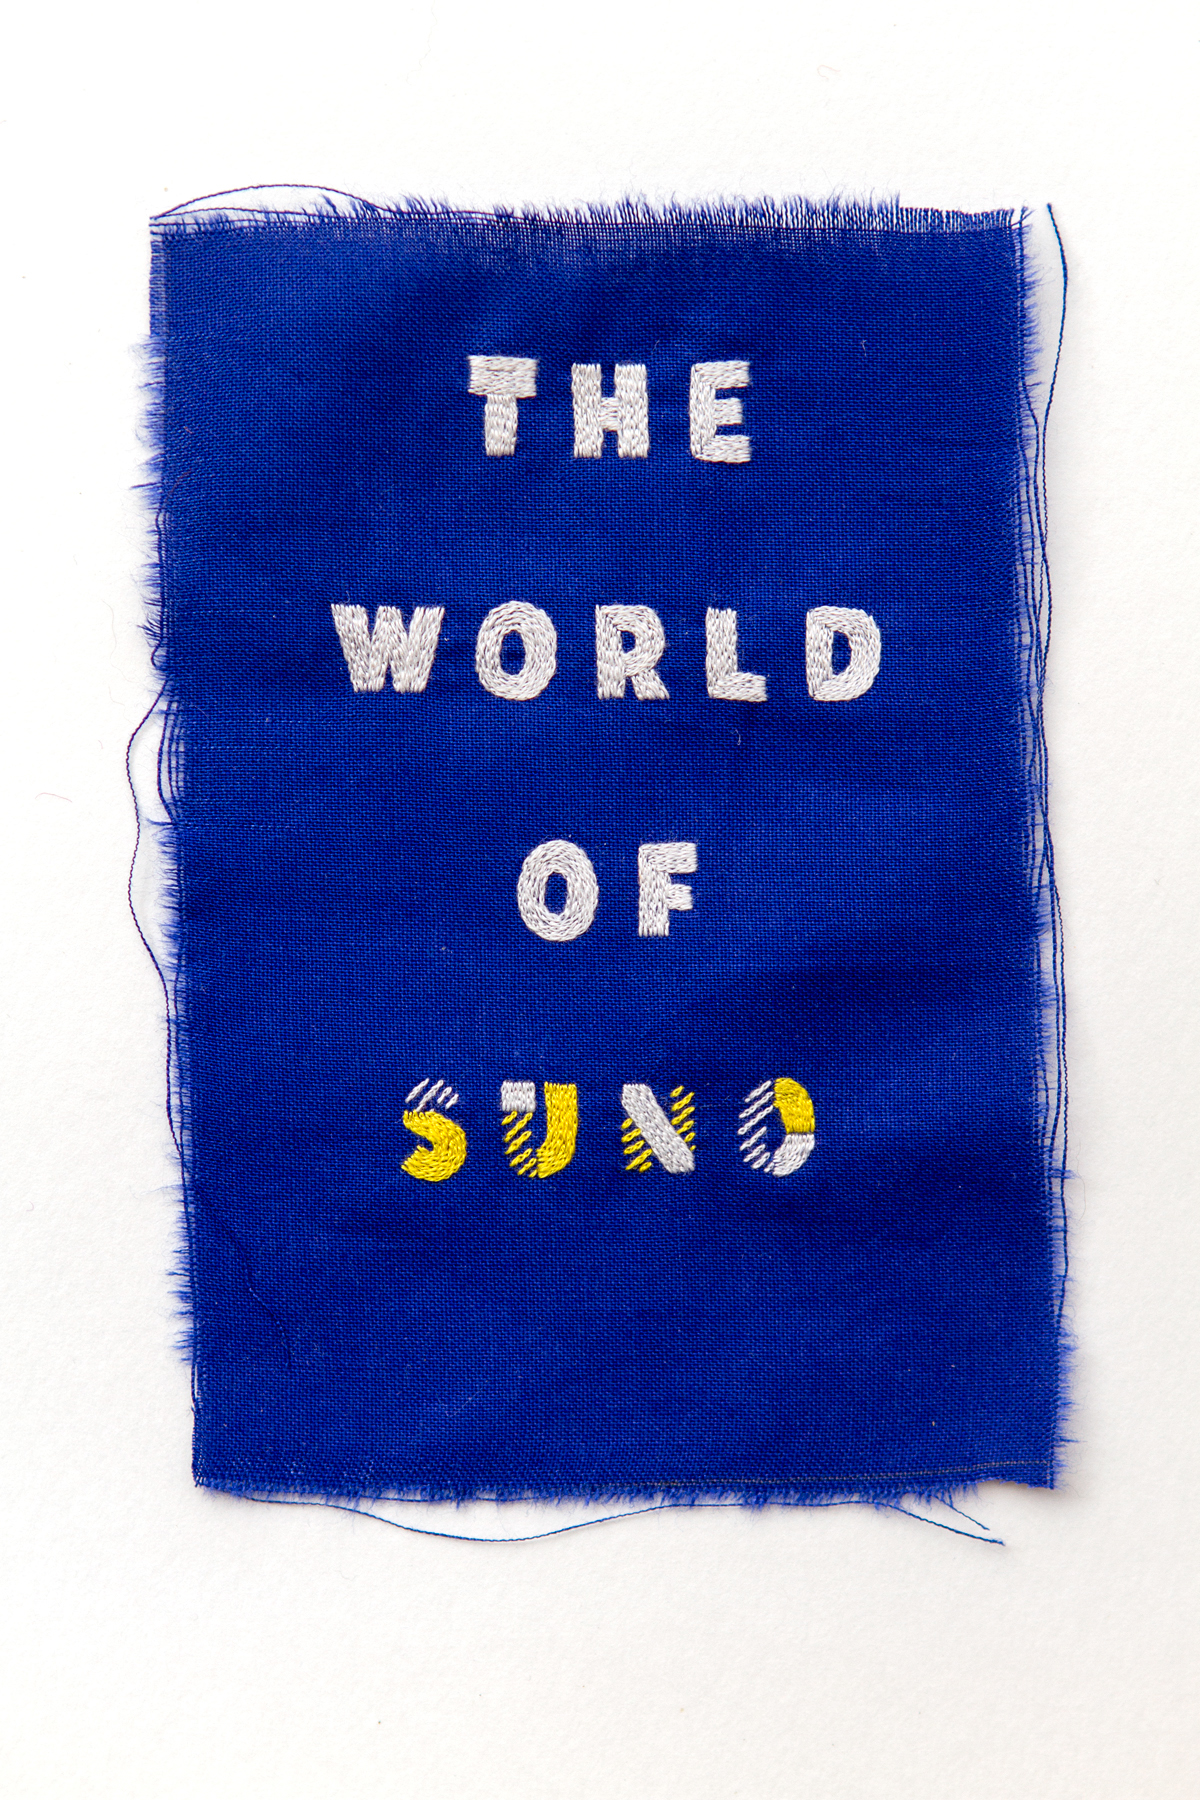 Embroidery embroidered sewn stitched needle and thread textile maricormaricar suno tactile lettering